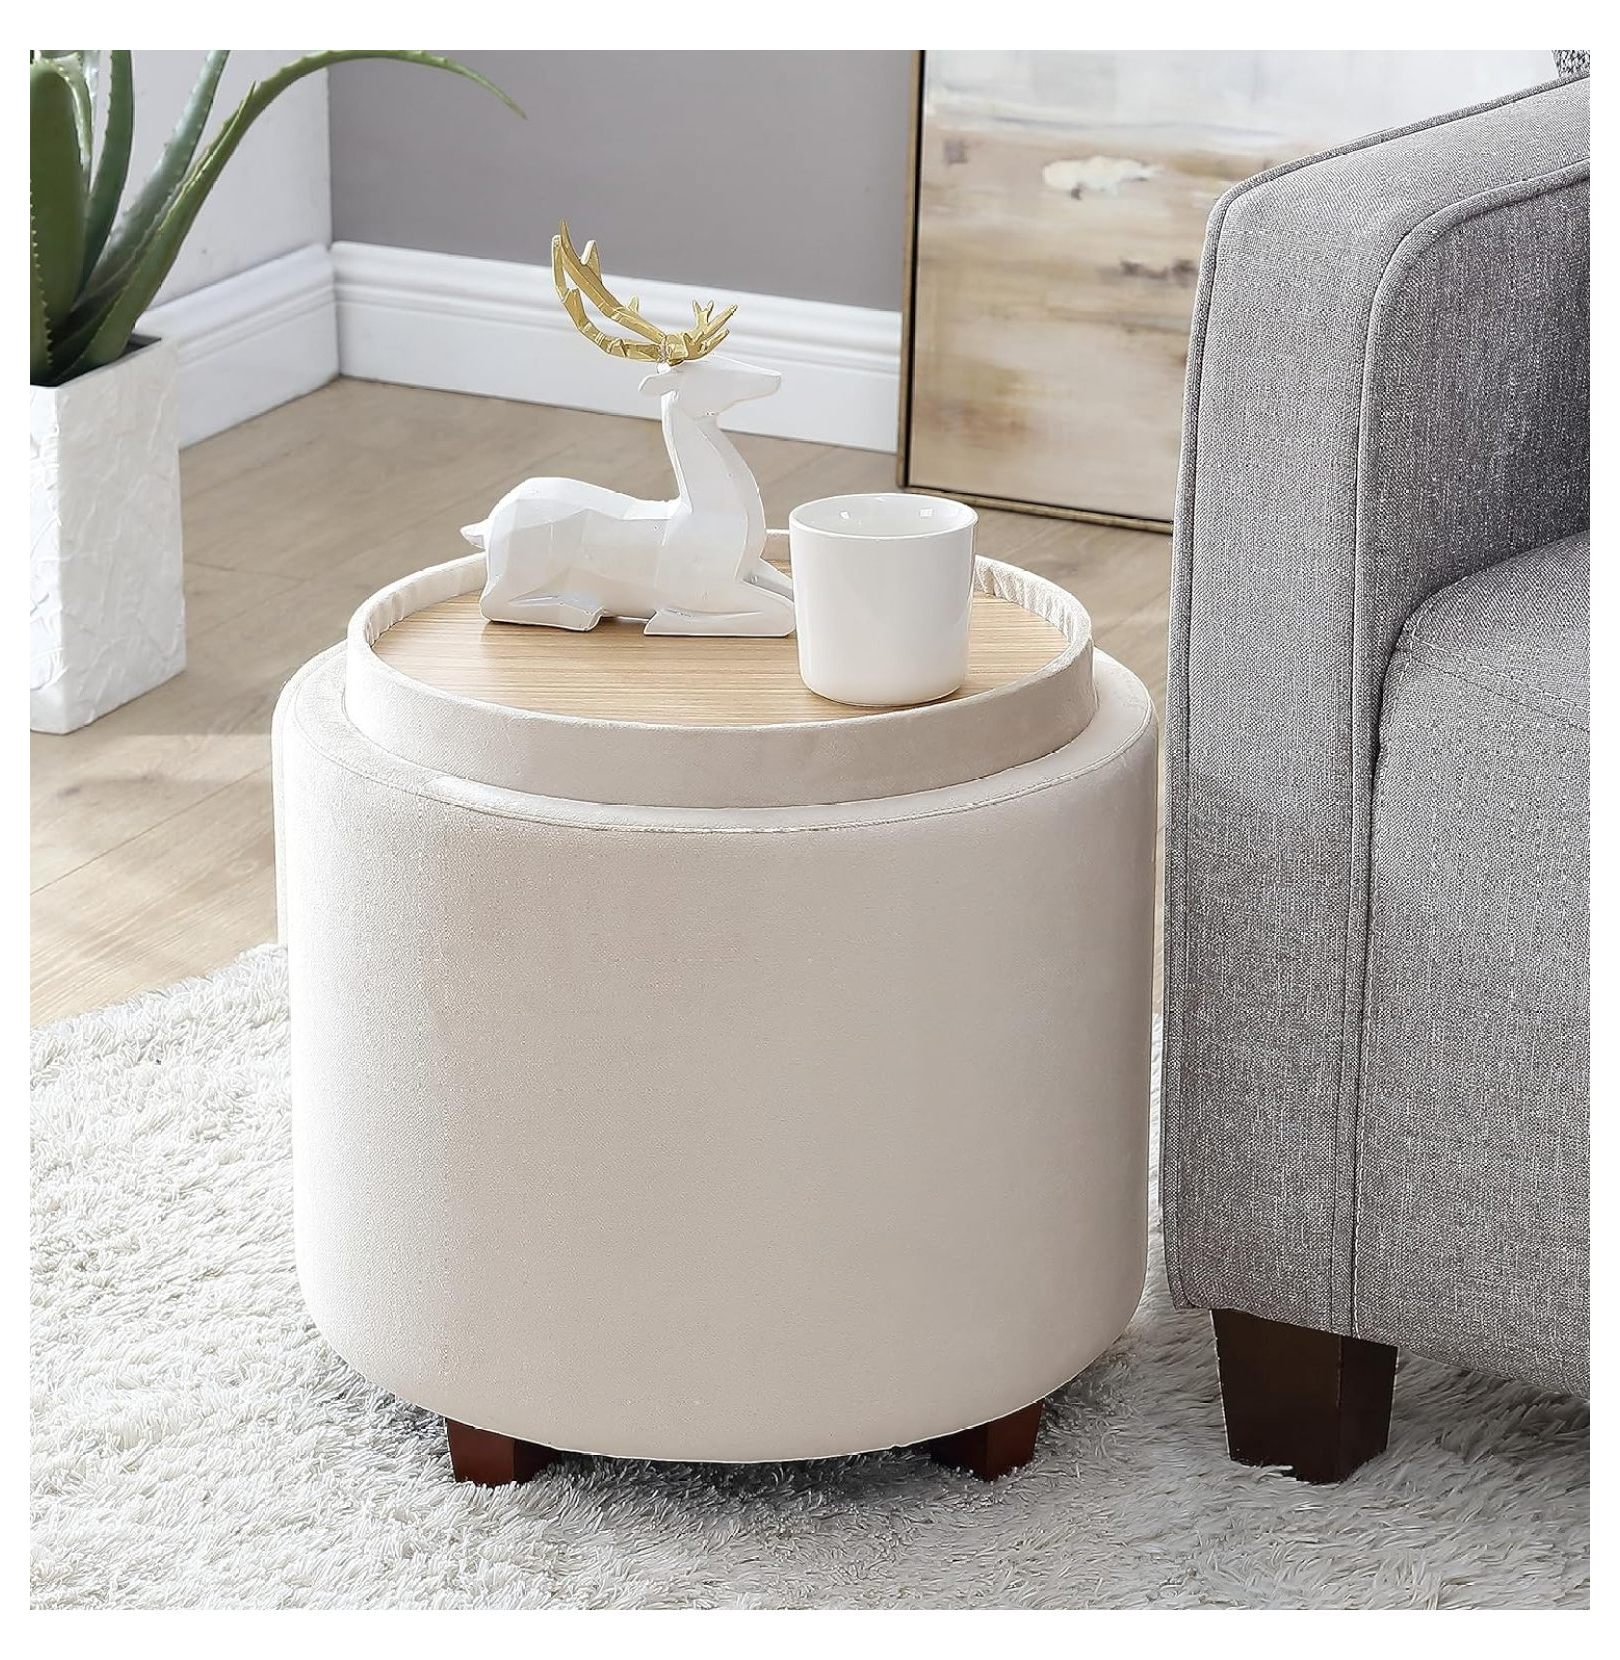 BULYAXIA Lawrence Round Storage Ottoman with Lift Off Lid and Tray Lid Coffee Table, Ottoman with Storage for Living Room, Bedroom and Office, Velvet Cream - image 1 of 7